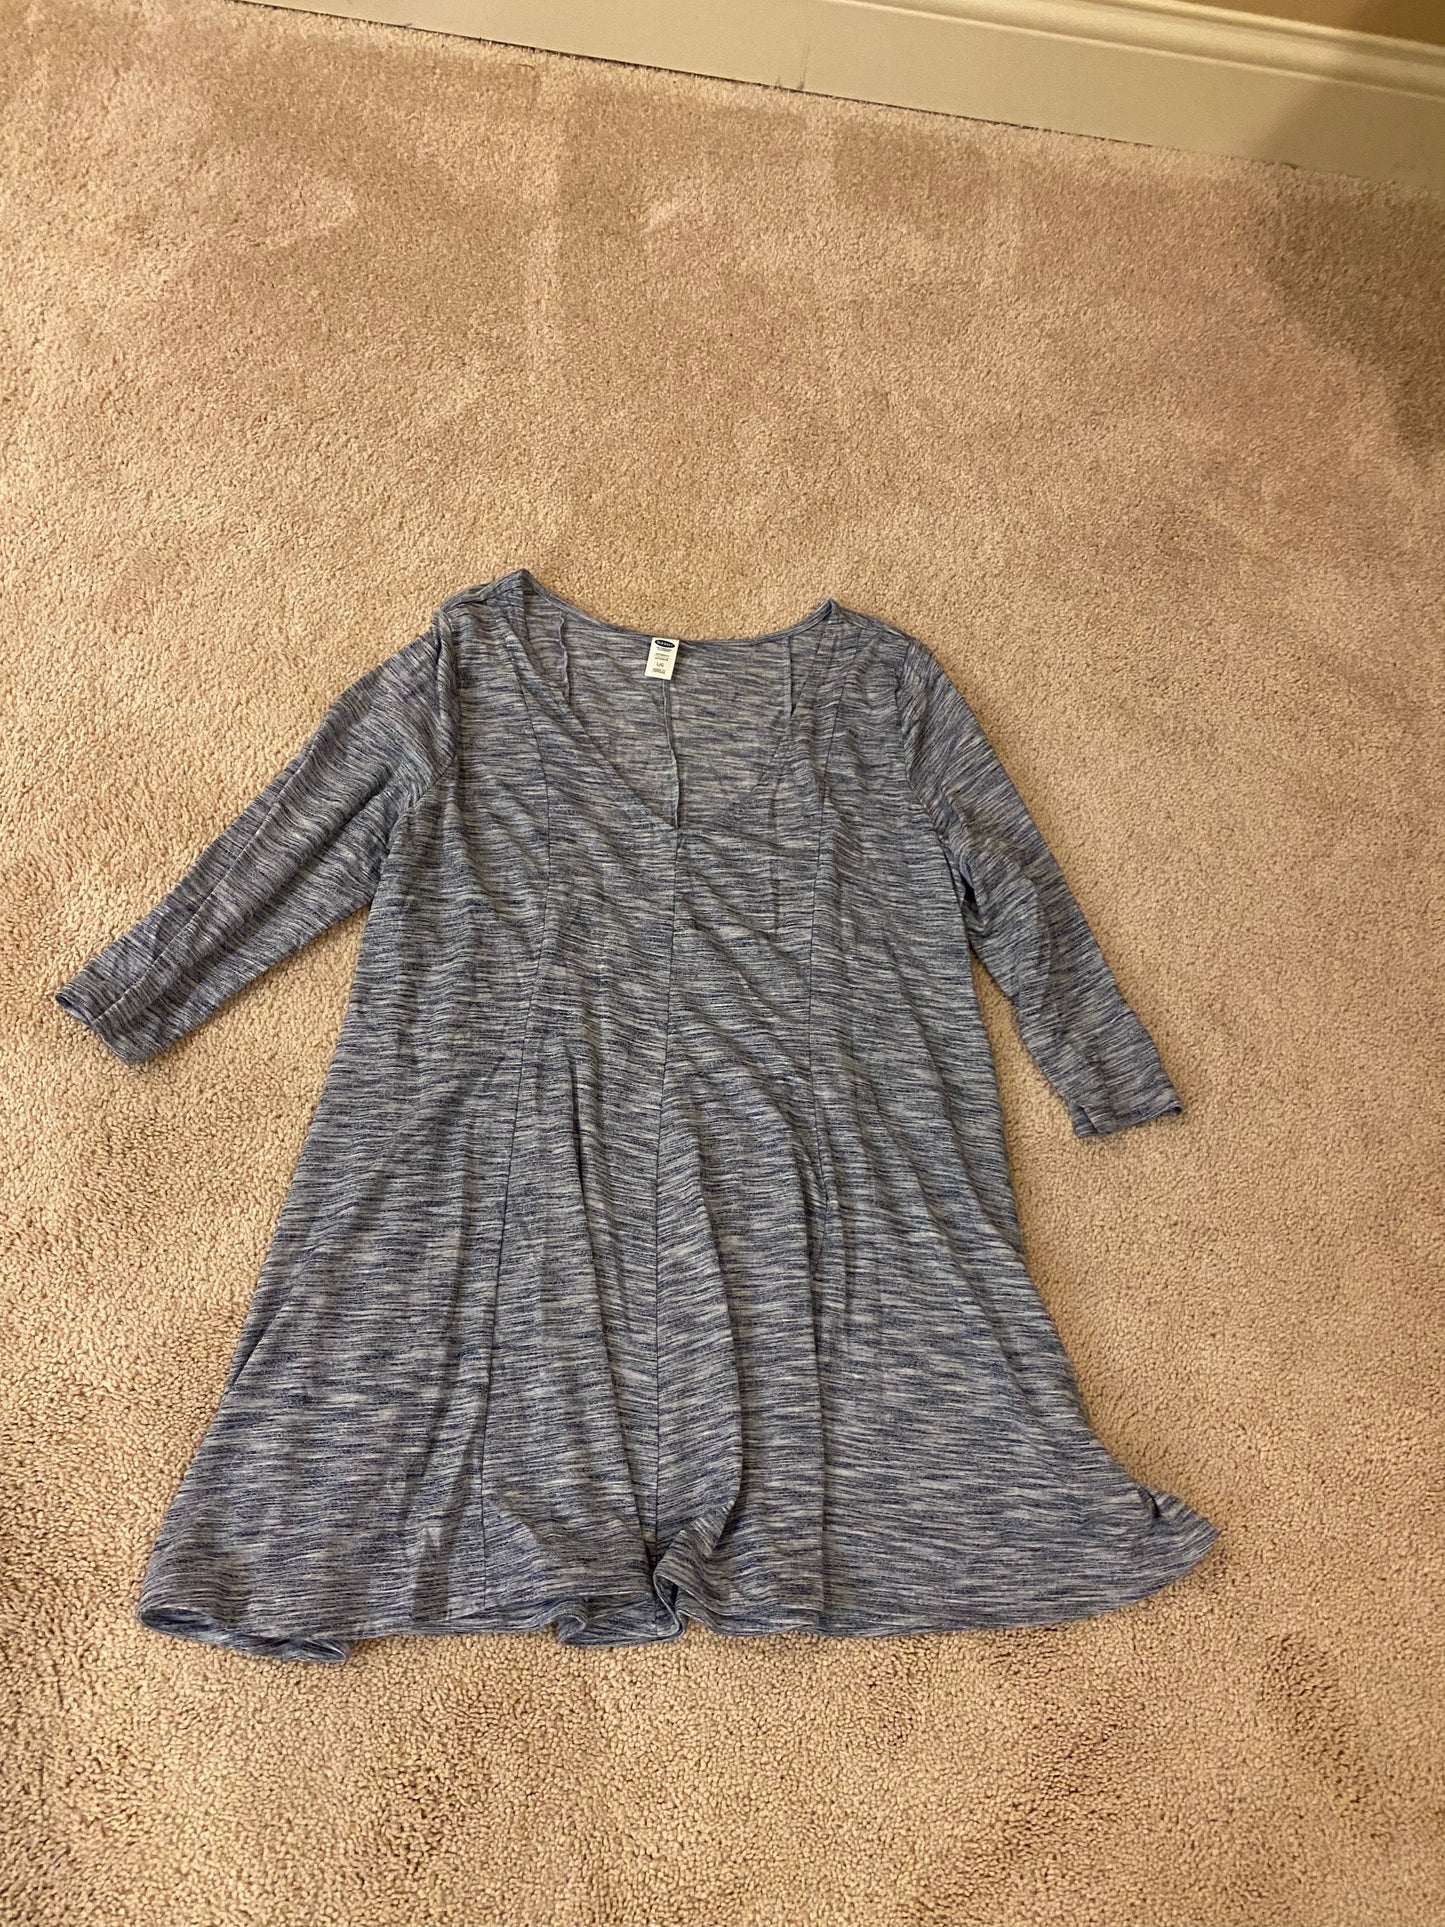 Old Navy Blue/White 3/4 sleeve shirt-size L